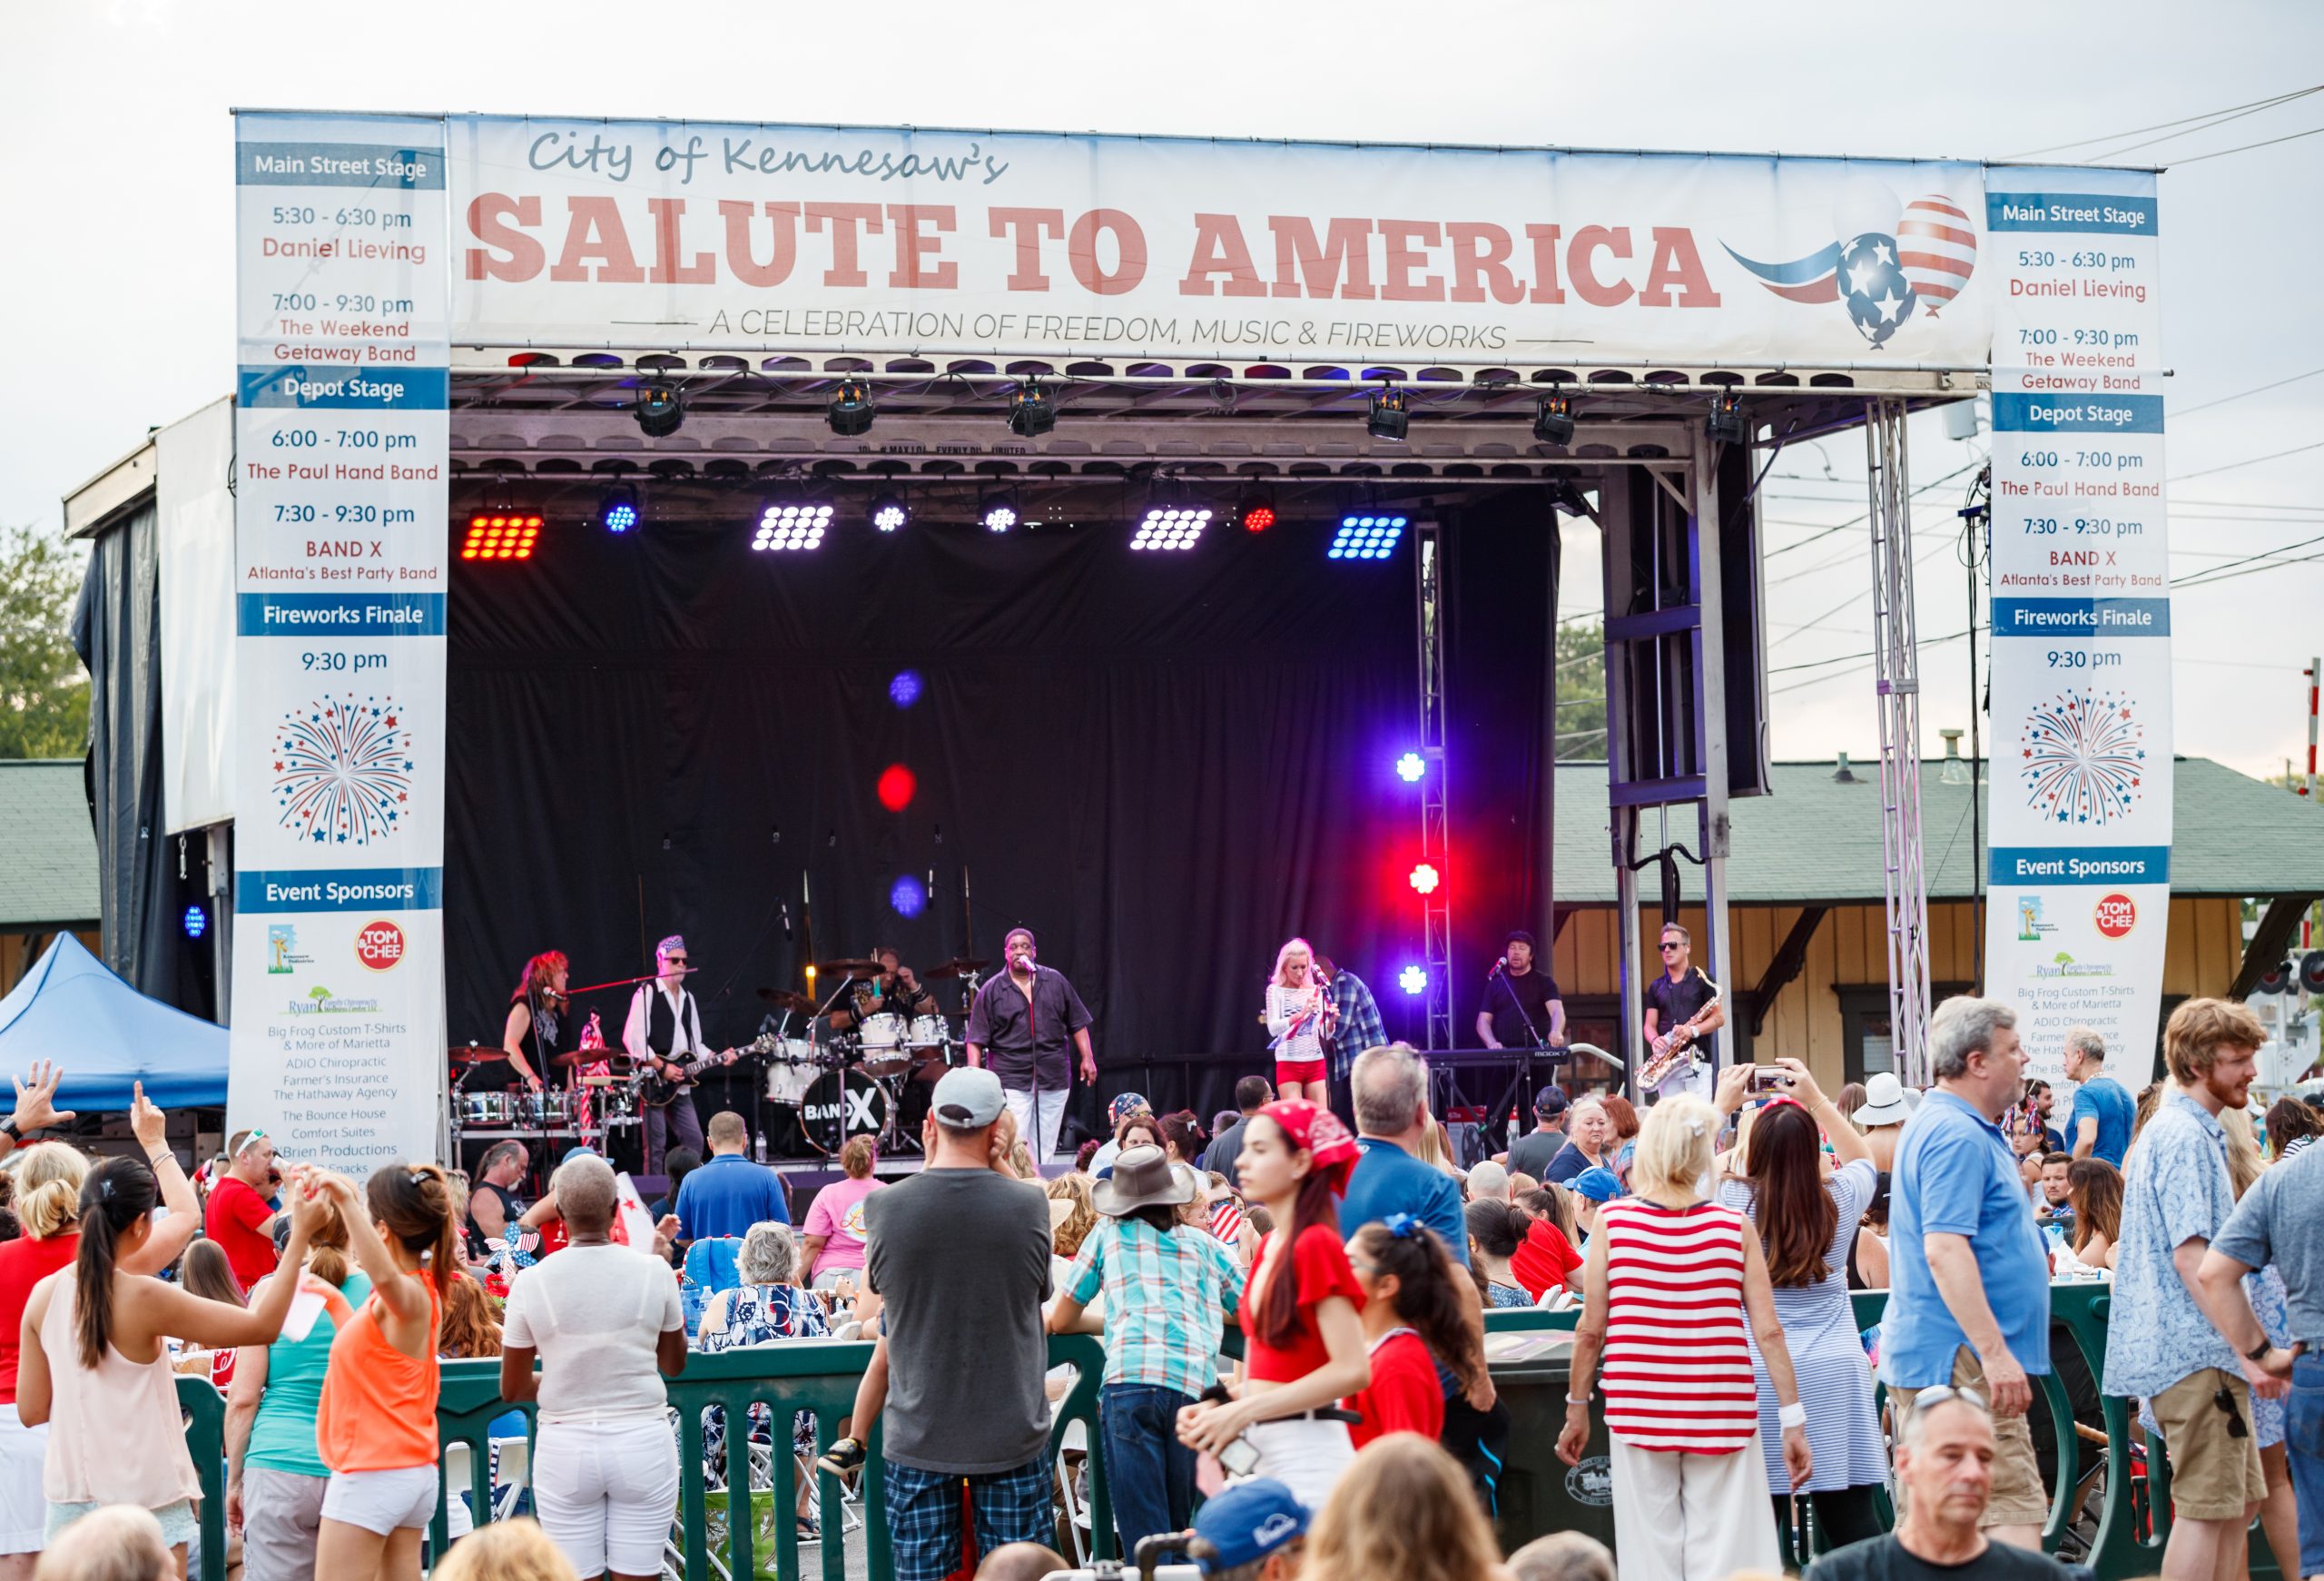 Kennesaw's Salute to America will include live music, a Kid's Parade, food vendors and fireworks on July 3. (Courtesy of Kennesaw)